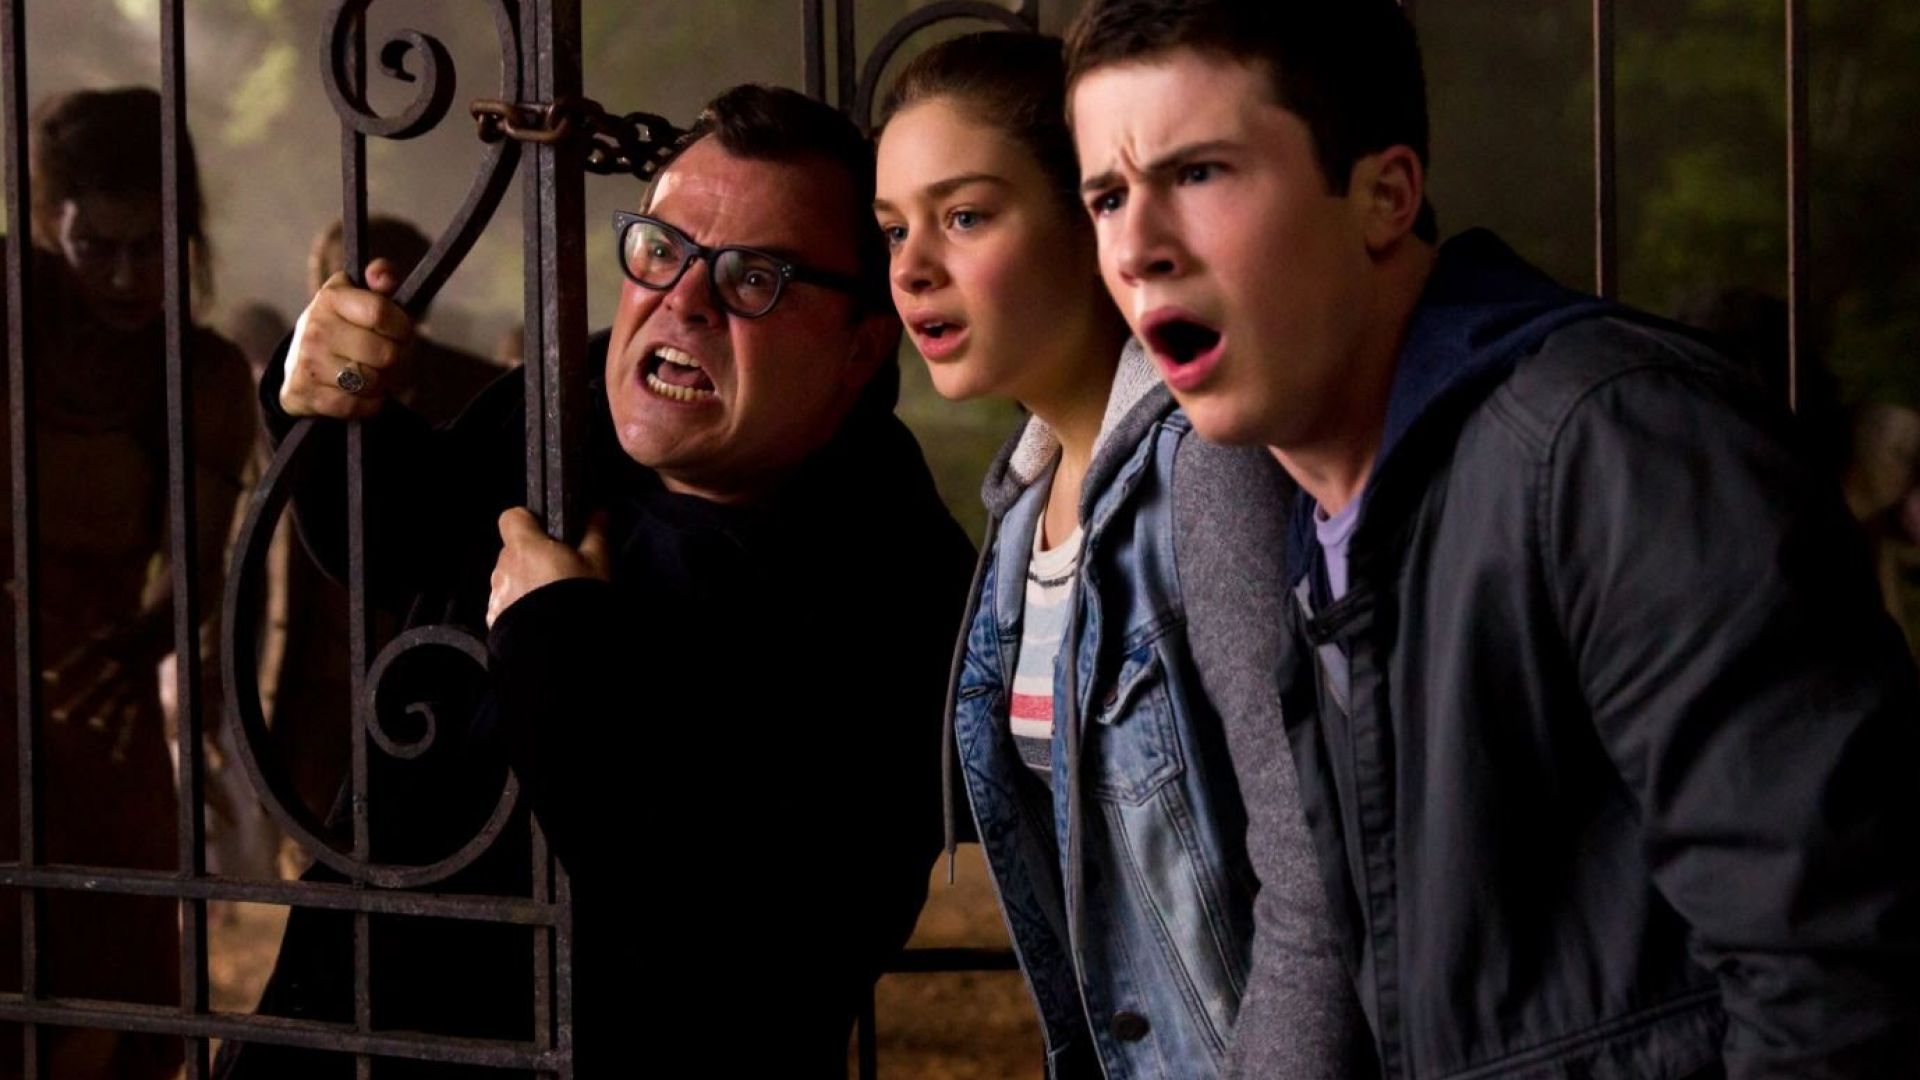 Giant Praying Mantis shows up in new clip from &#039;Goosebumps&#039;